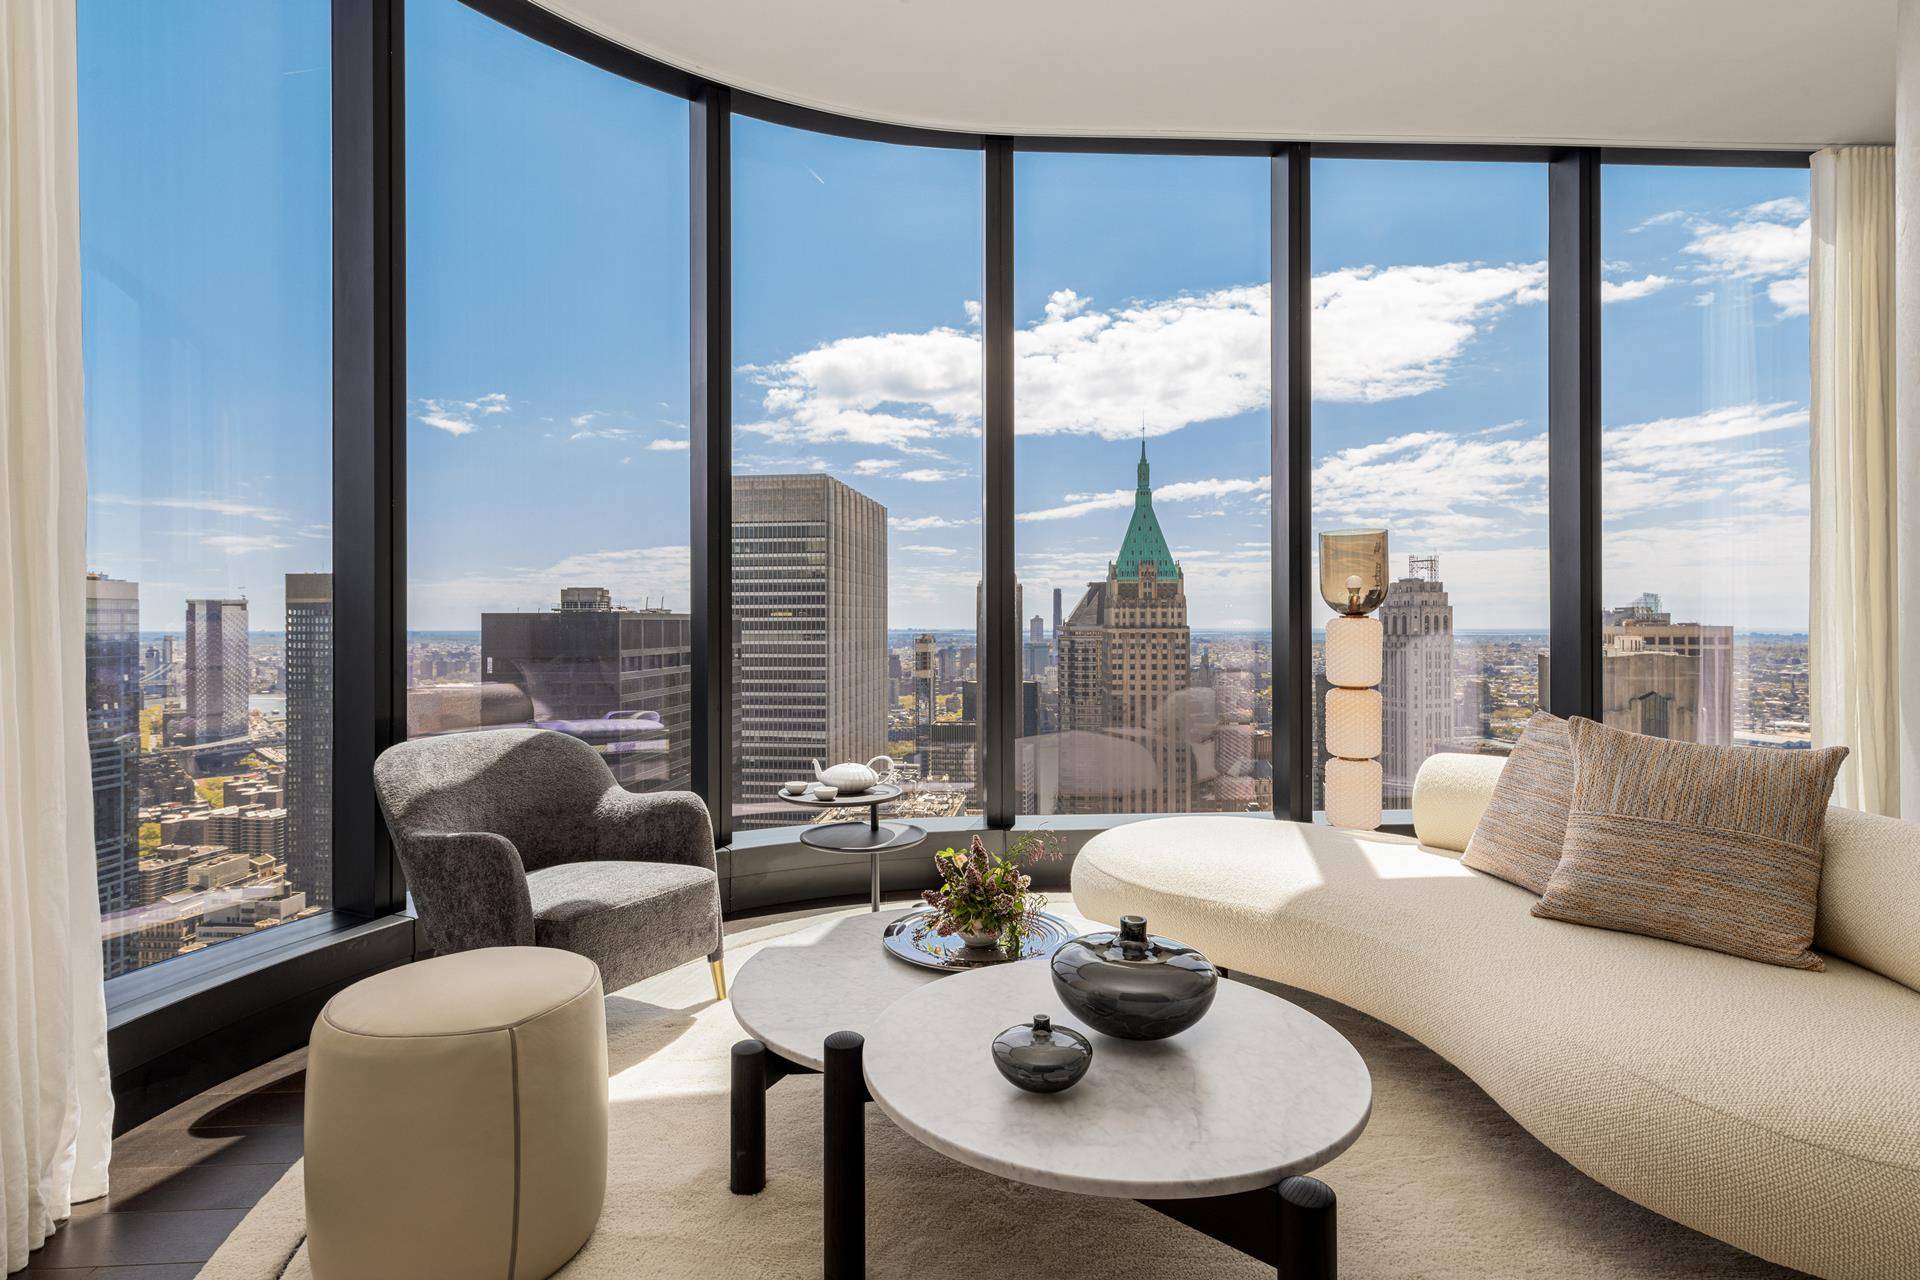 Introducing Residence 71A at The Greenwich by Rafael Vi oly, a north and east facing one bedroom, showcasing sweeping panoramas of the Manhattan Skyline and the East River.